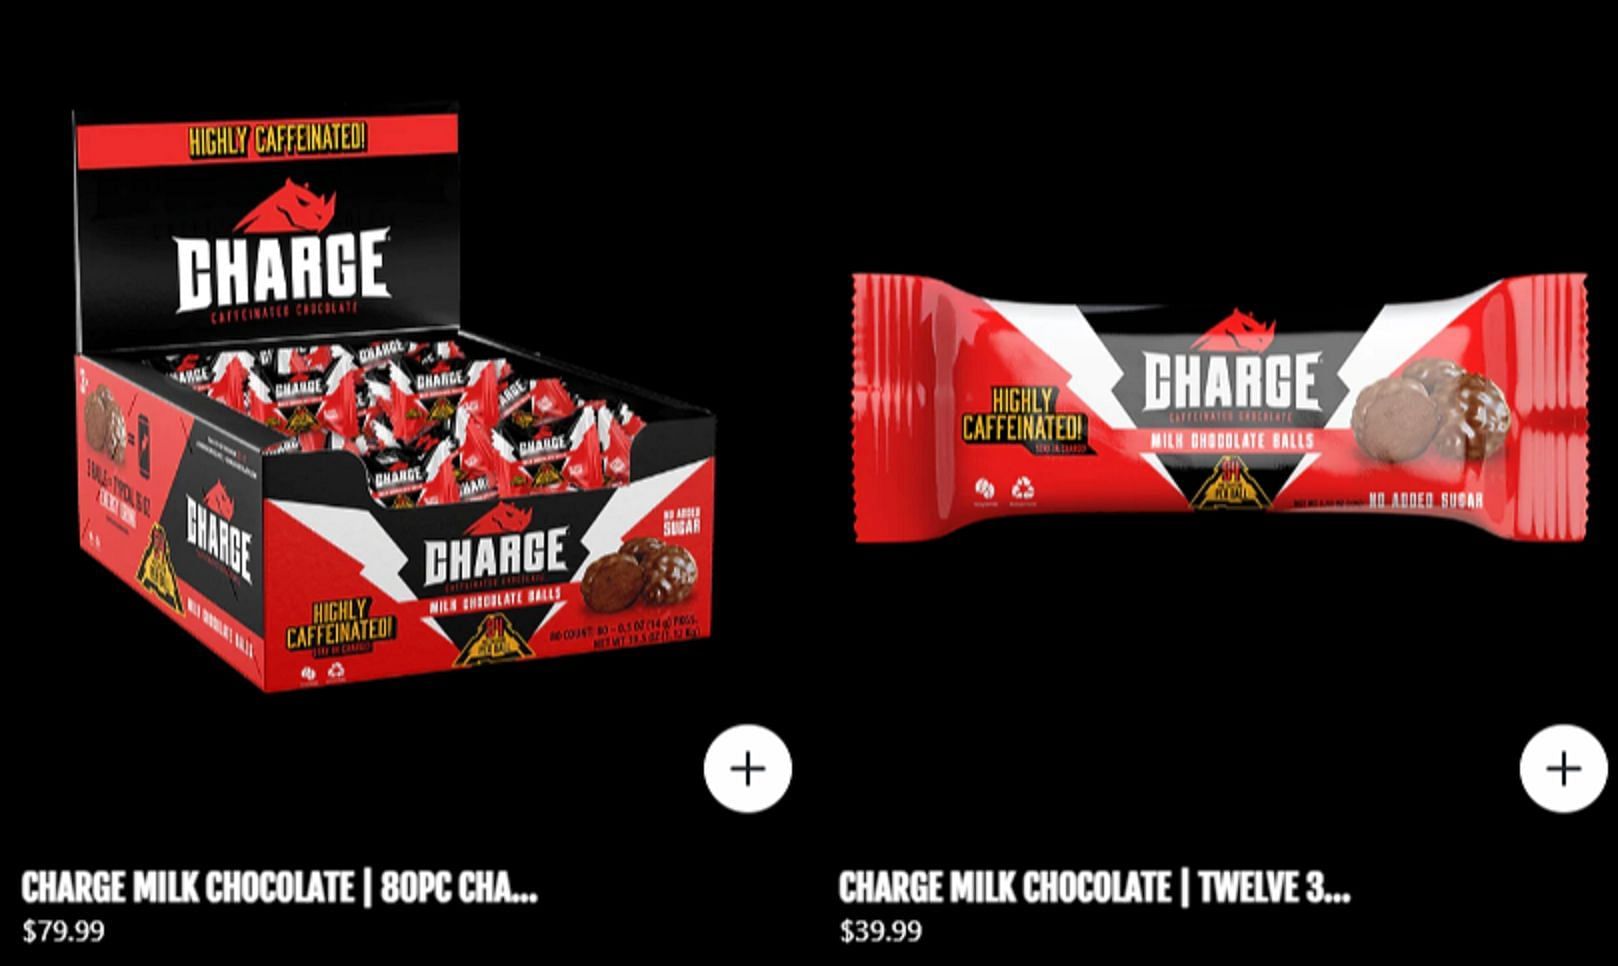 Charge Milk Chocolates priced at $79.99 and $39.99. (Image via chargechocolate.com)